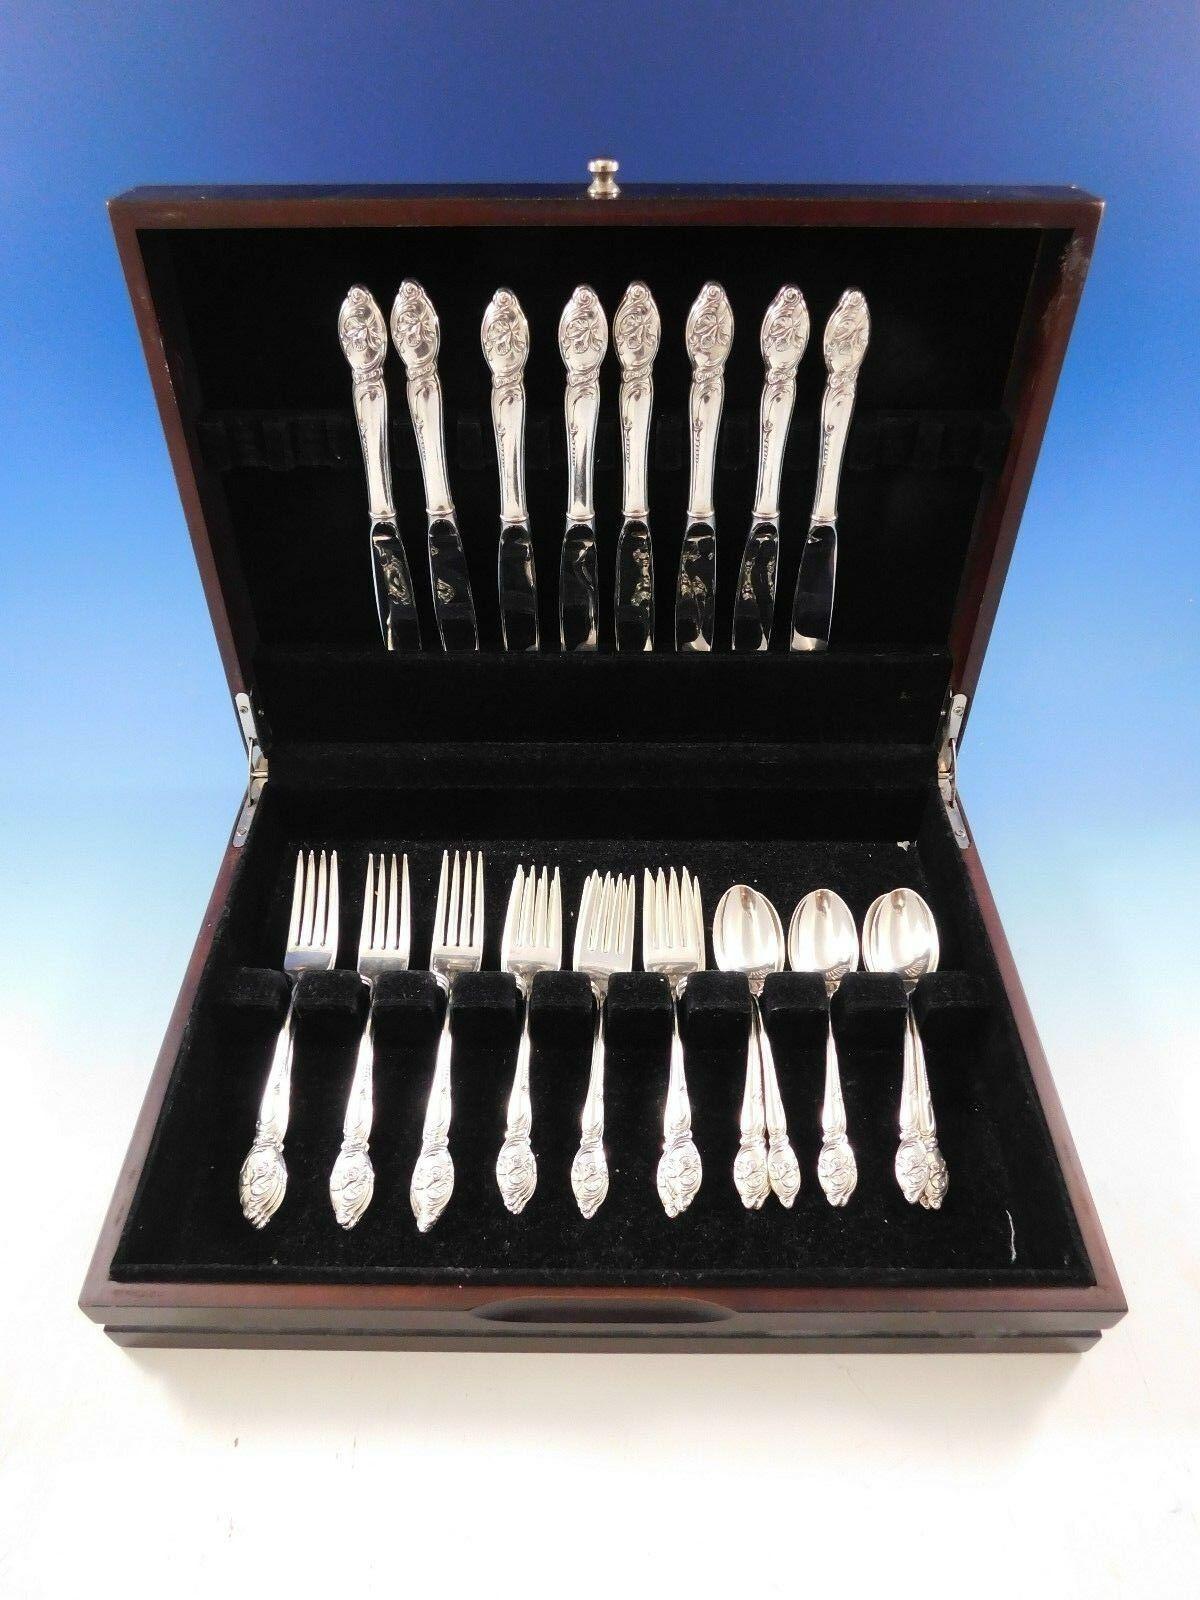 Stunning enchanting orchid by Westmorland sterling silver flatware set - 32 Pieces. This set includes:

8 knives, 9 1/8